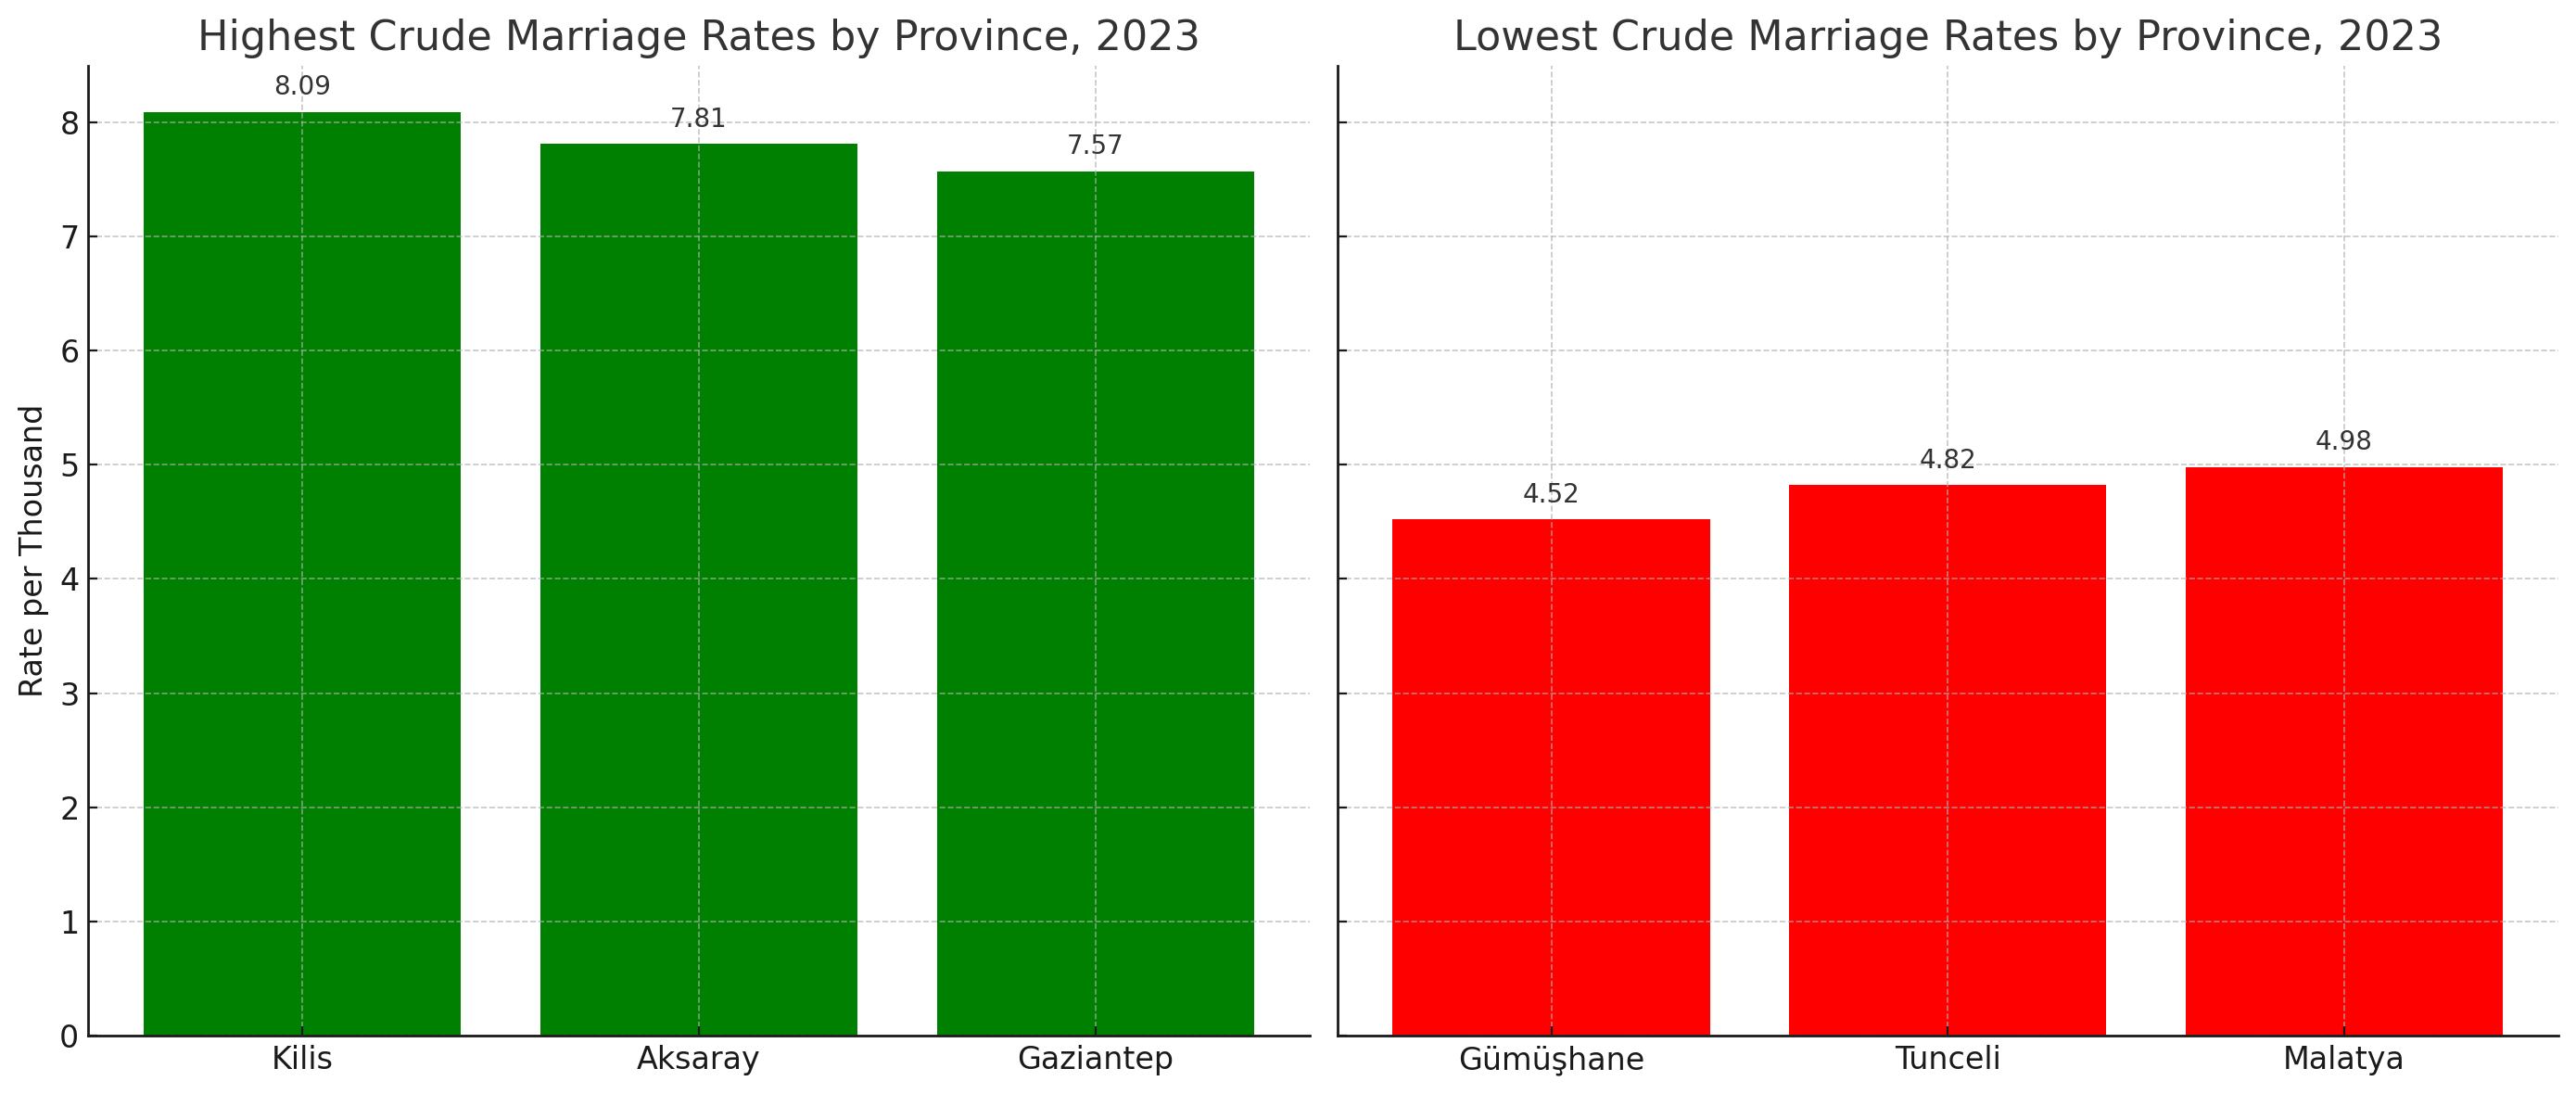 Chart shows Highest and Lowest Crude Marriage Rates by Province